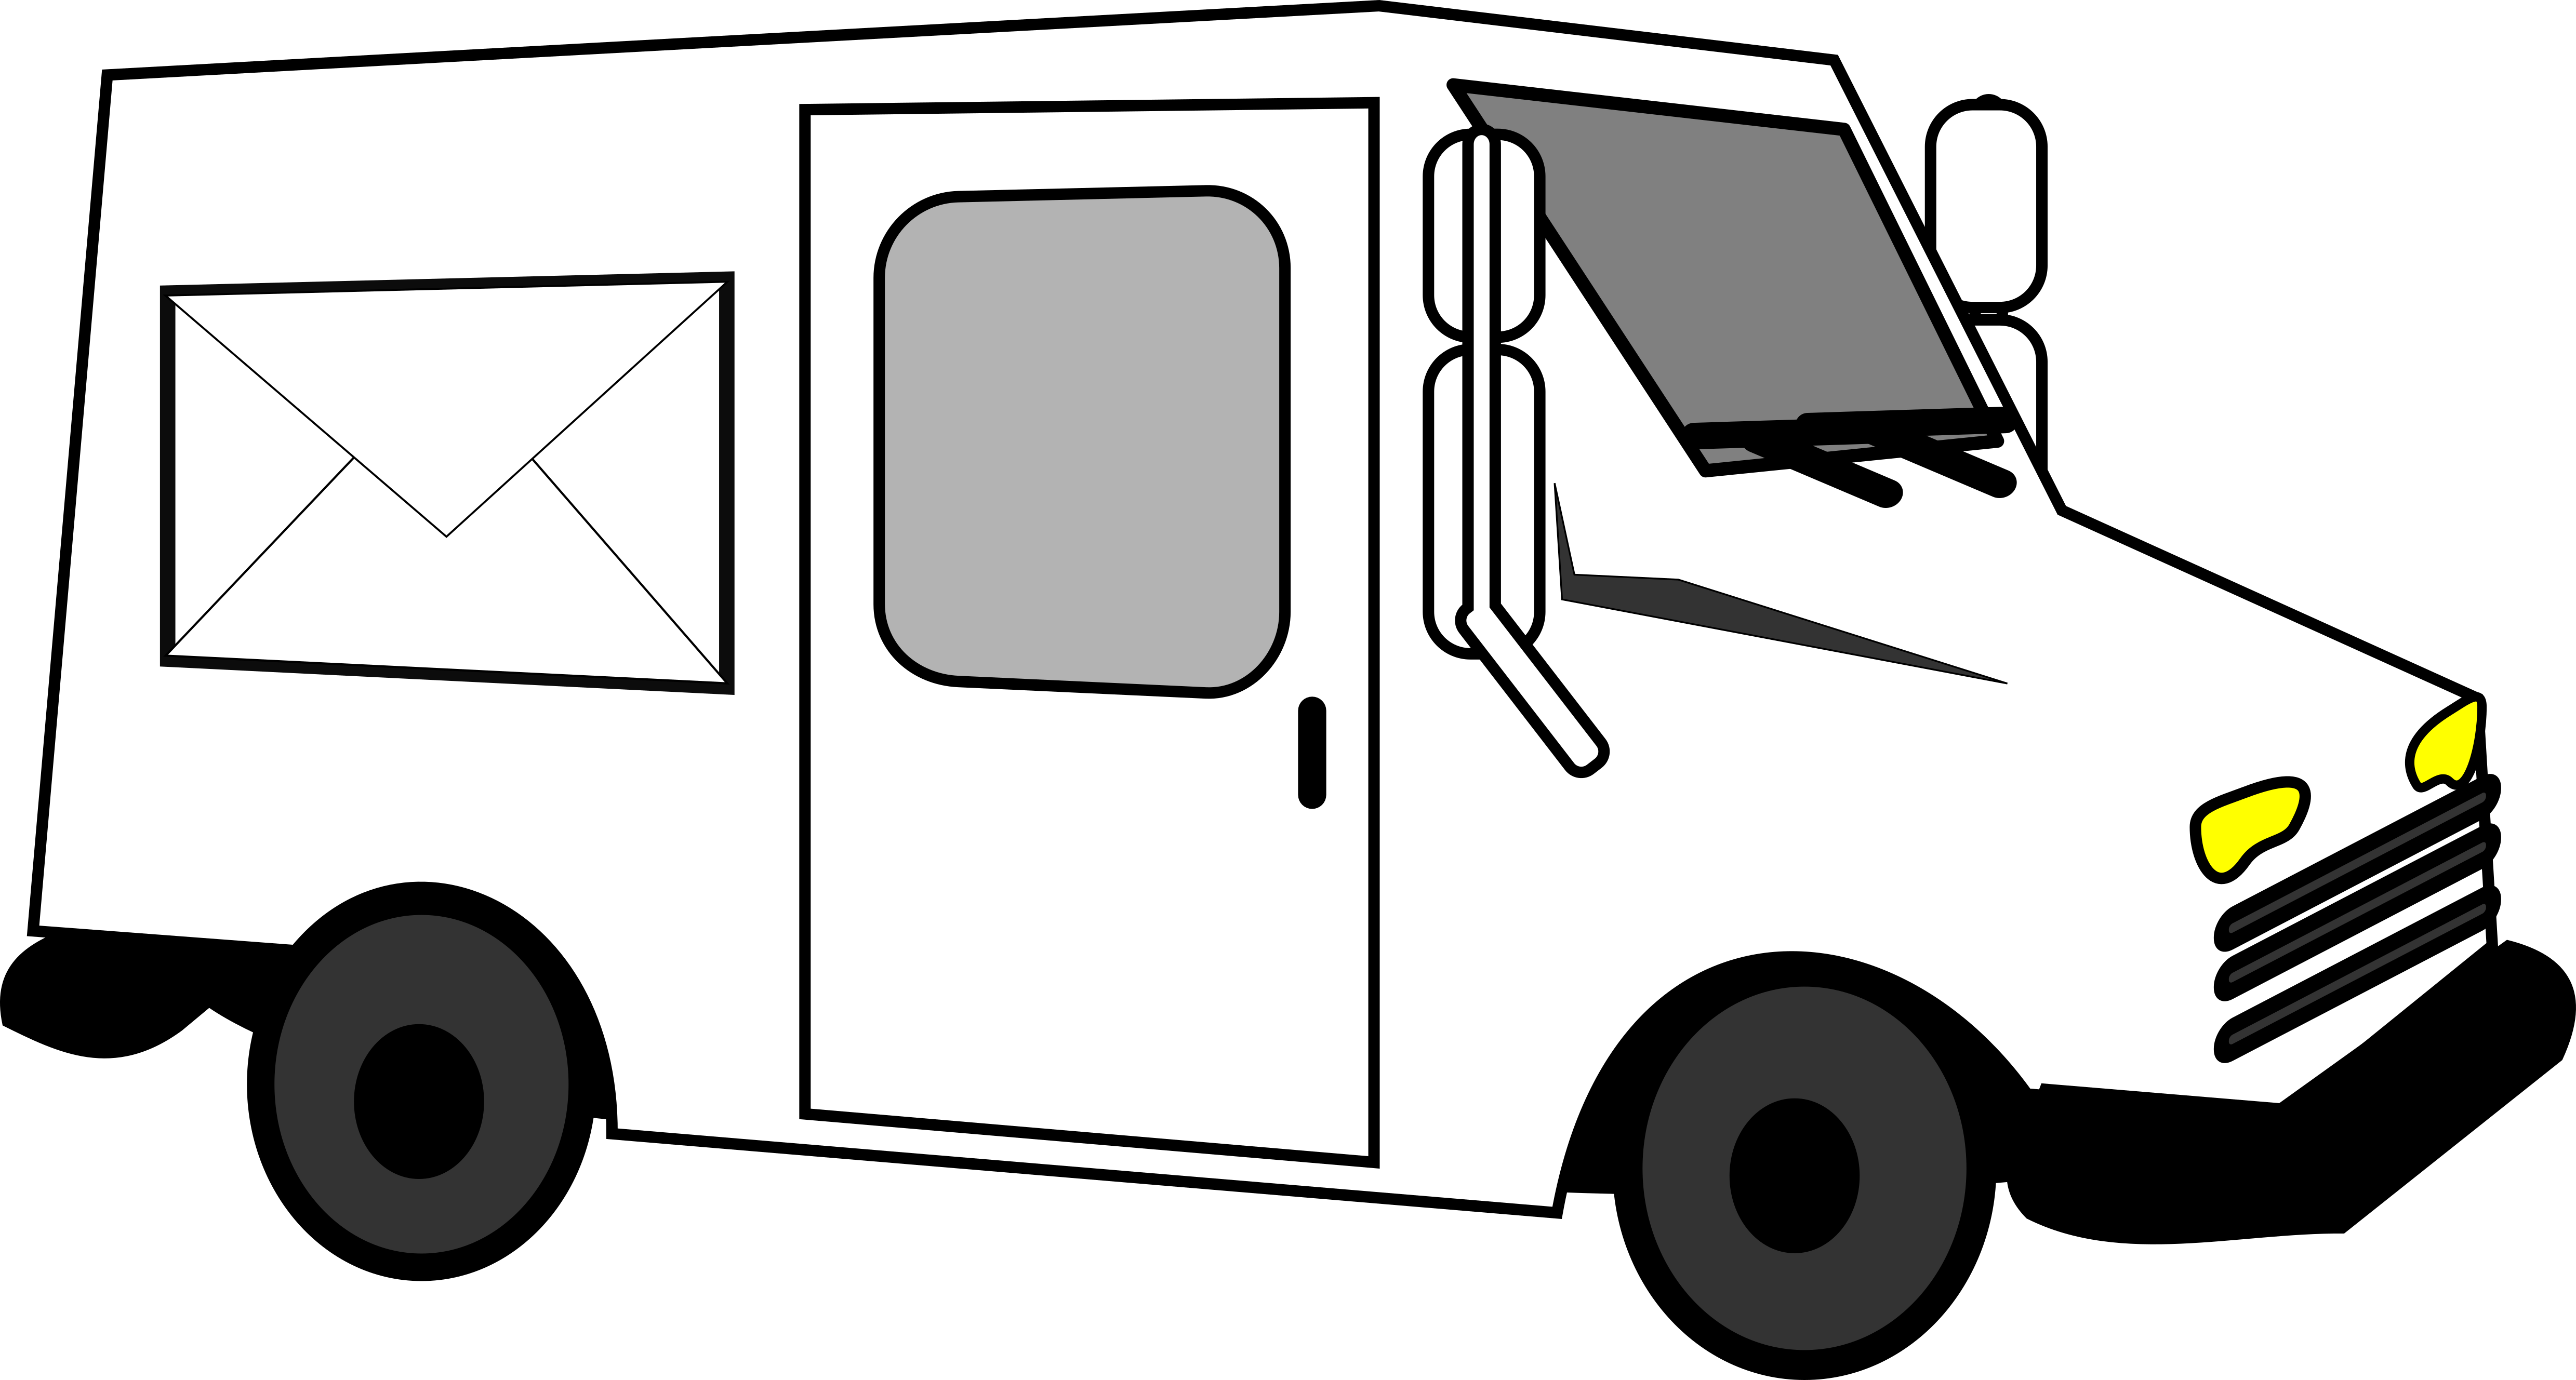 Picture #1589990 - mail clipart mail truck. mail clipart mail truck...